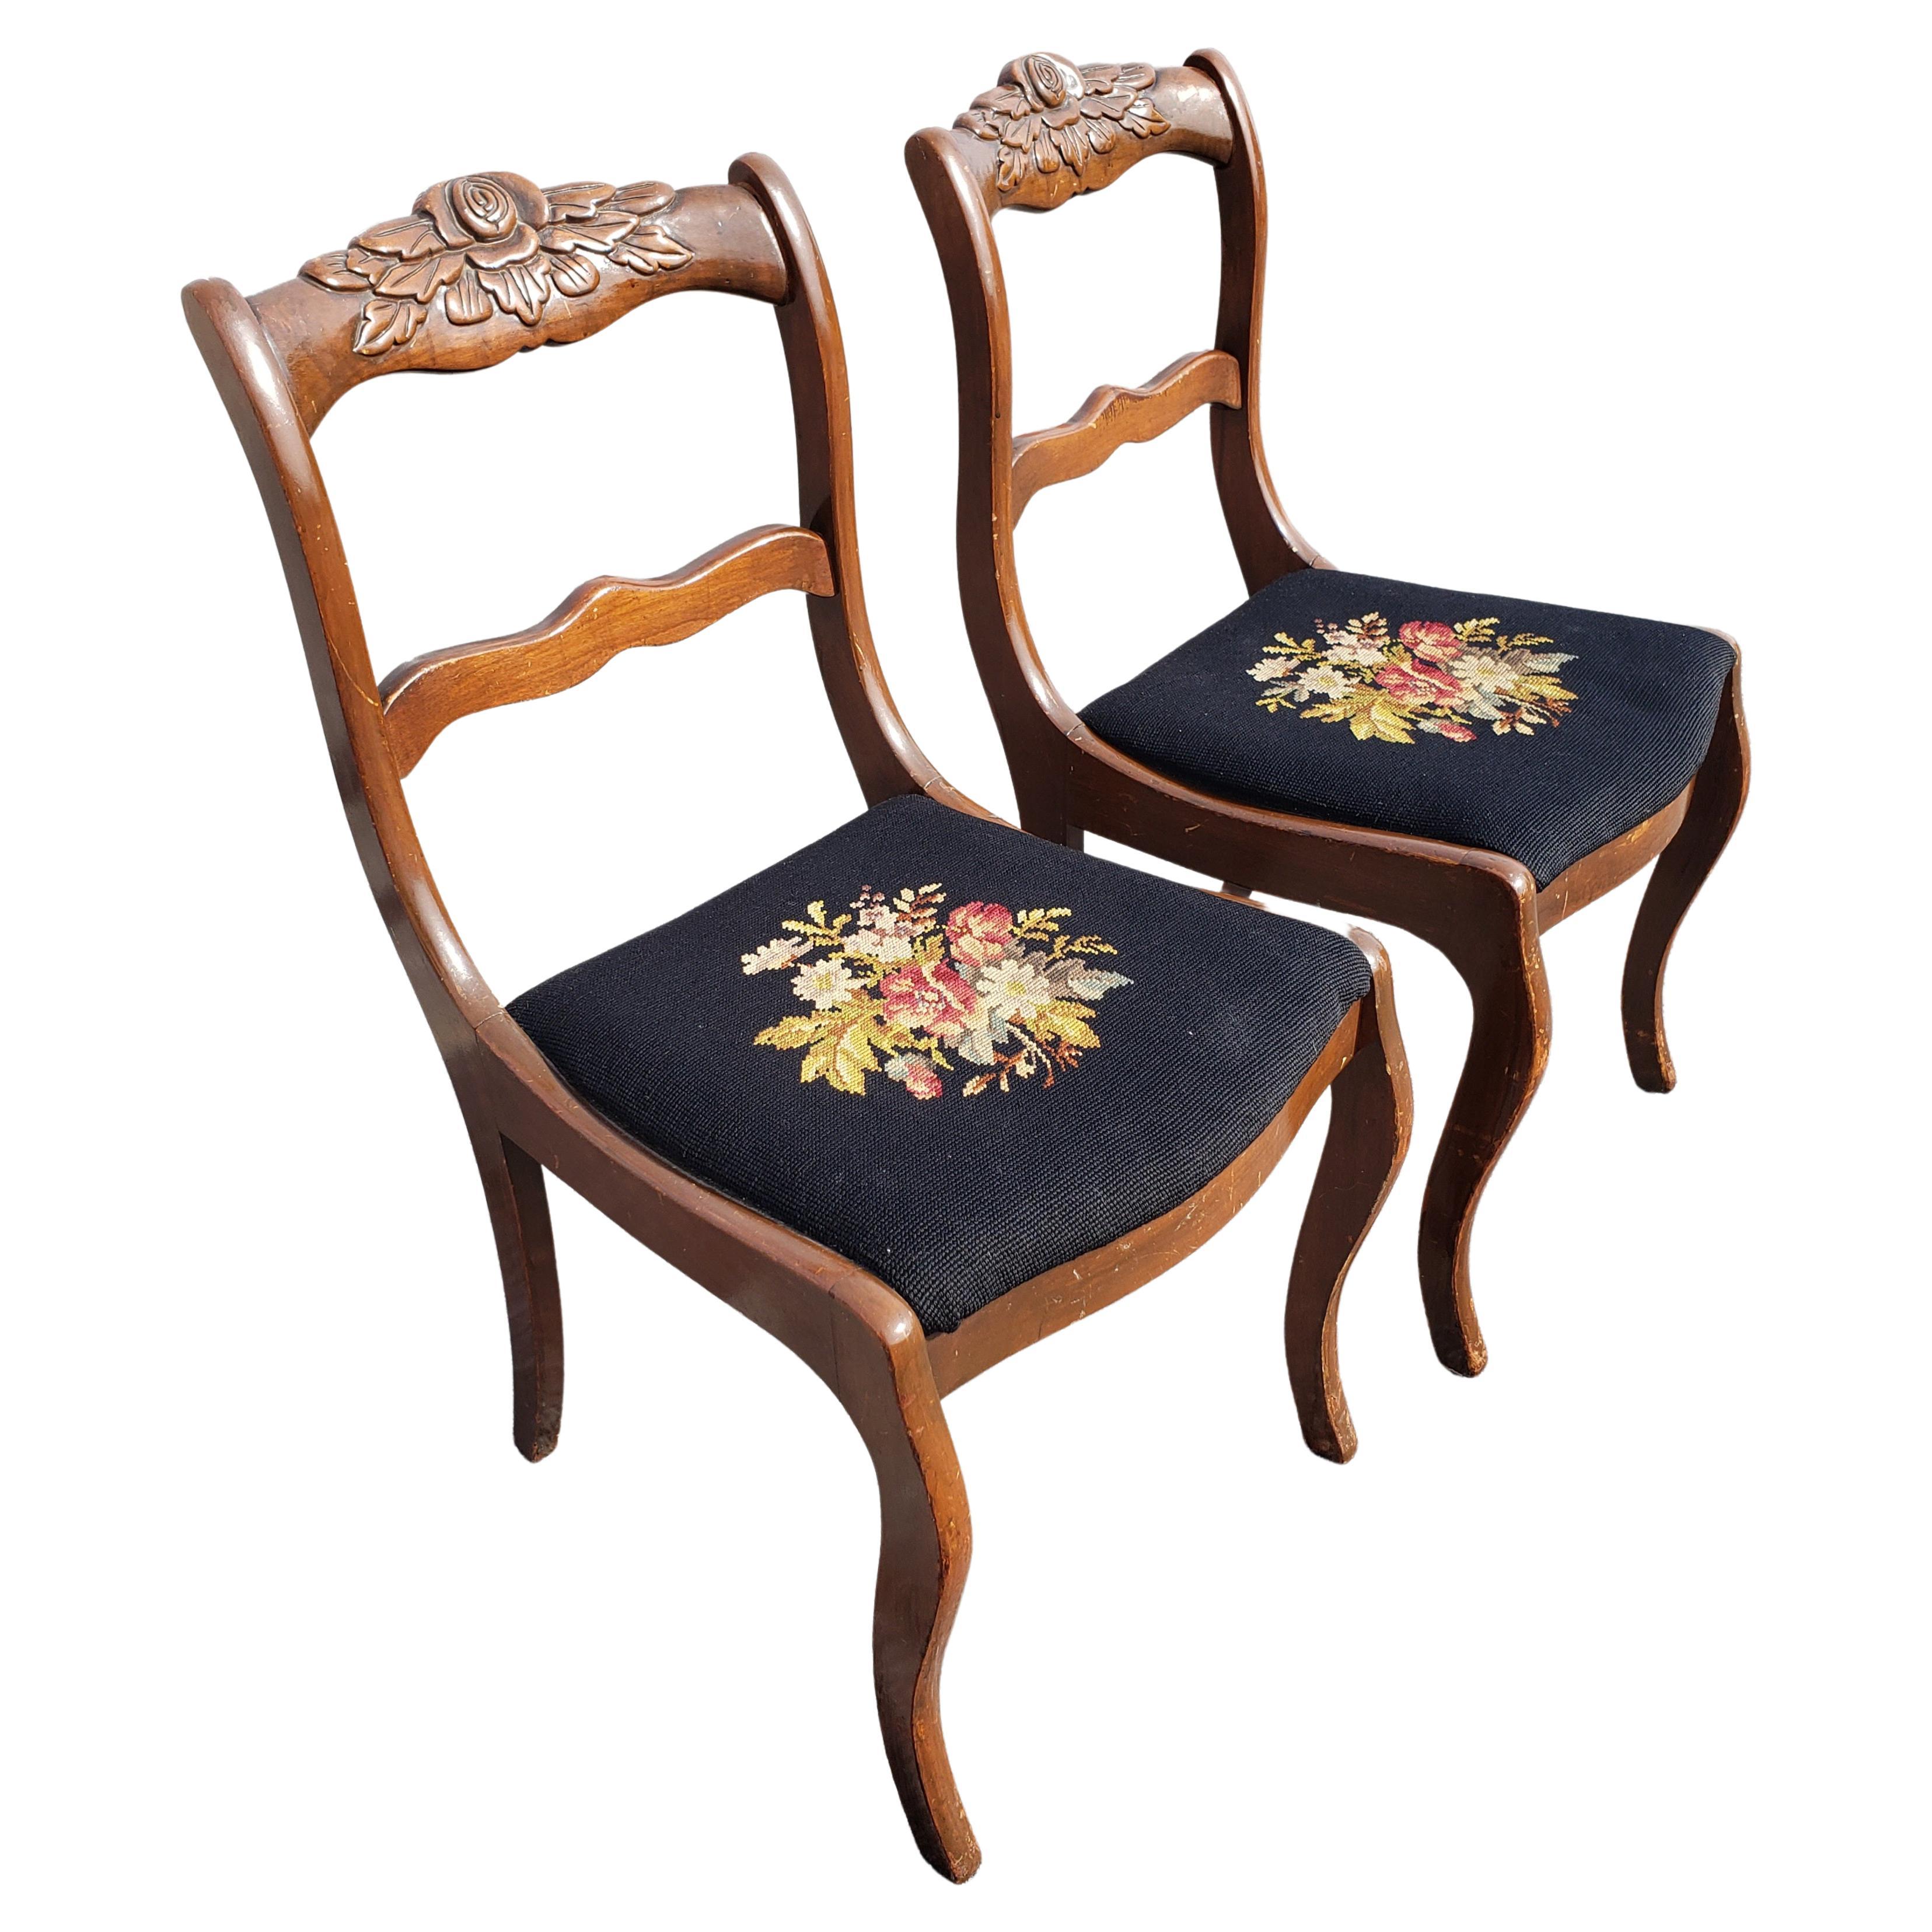 1940s Carved Ladder Back Needlepoint Seat Chairs. Good vintage condition. Needlepoint upholstery seat in good condition.
Measures 17